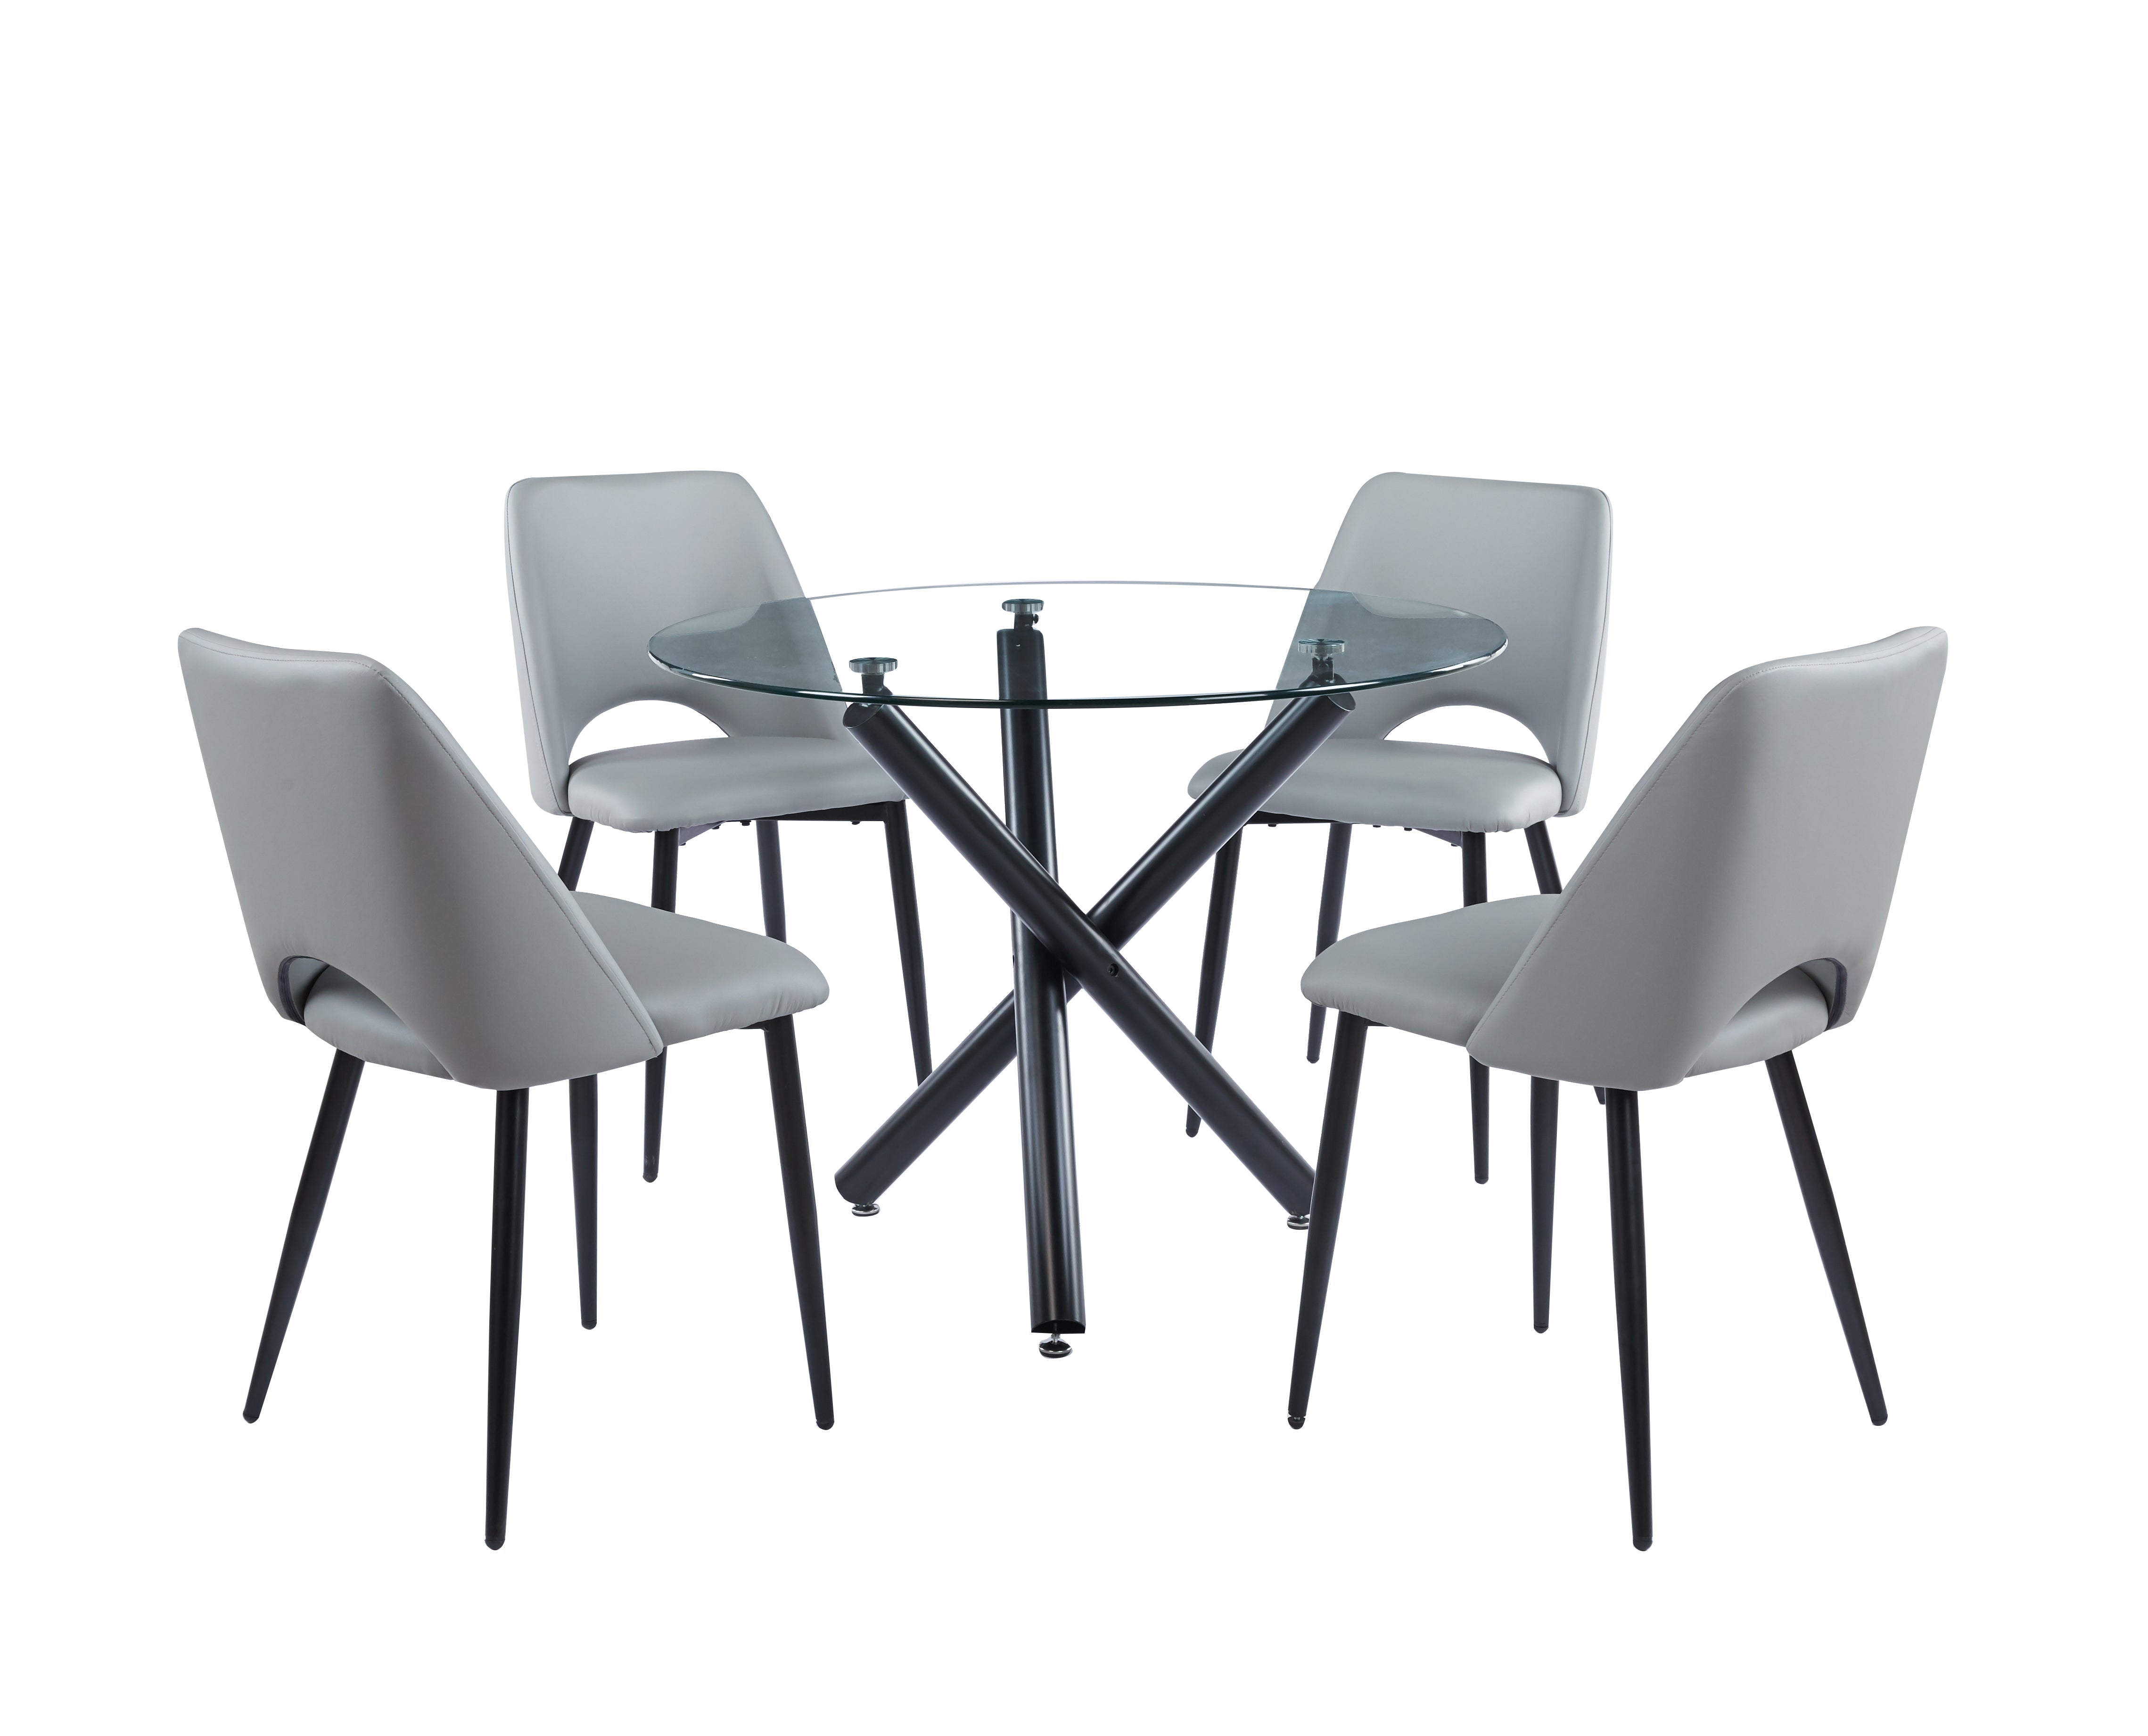 The Velets Luna Round Glass Top Dining Table with Black Sturdy Metal legs